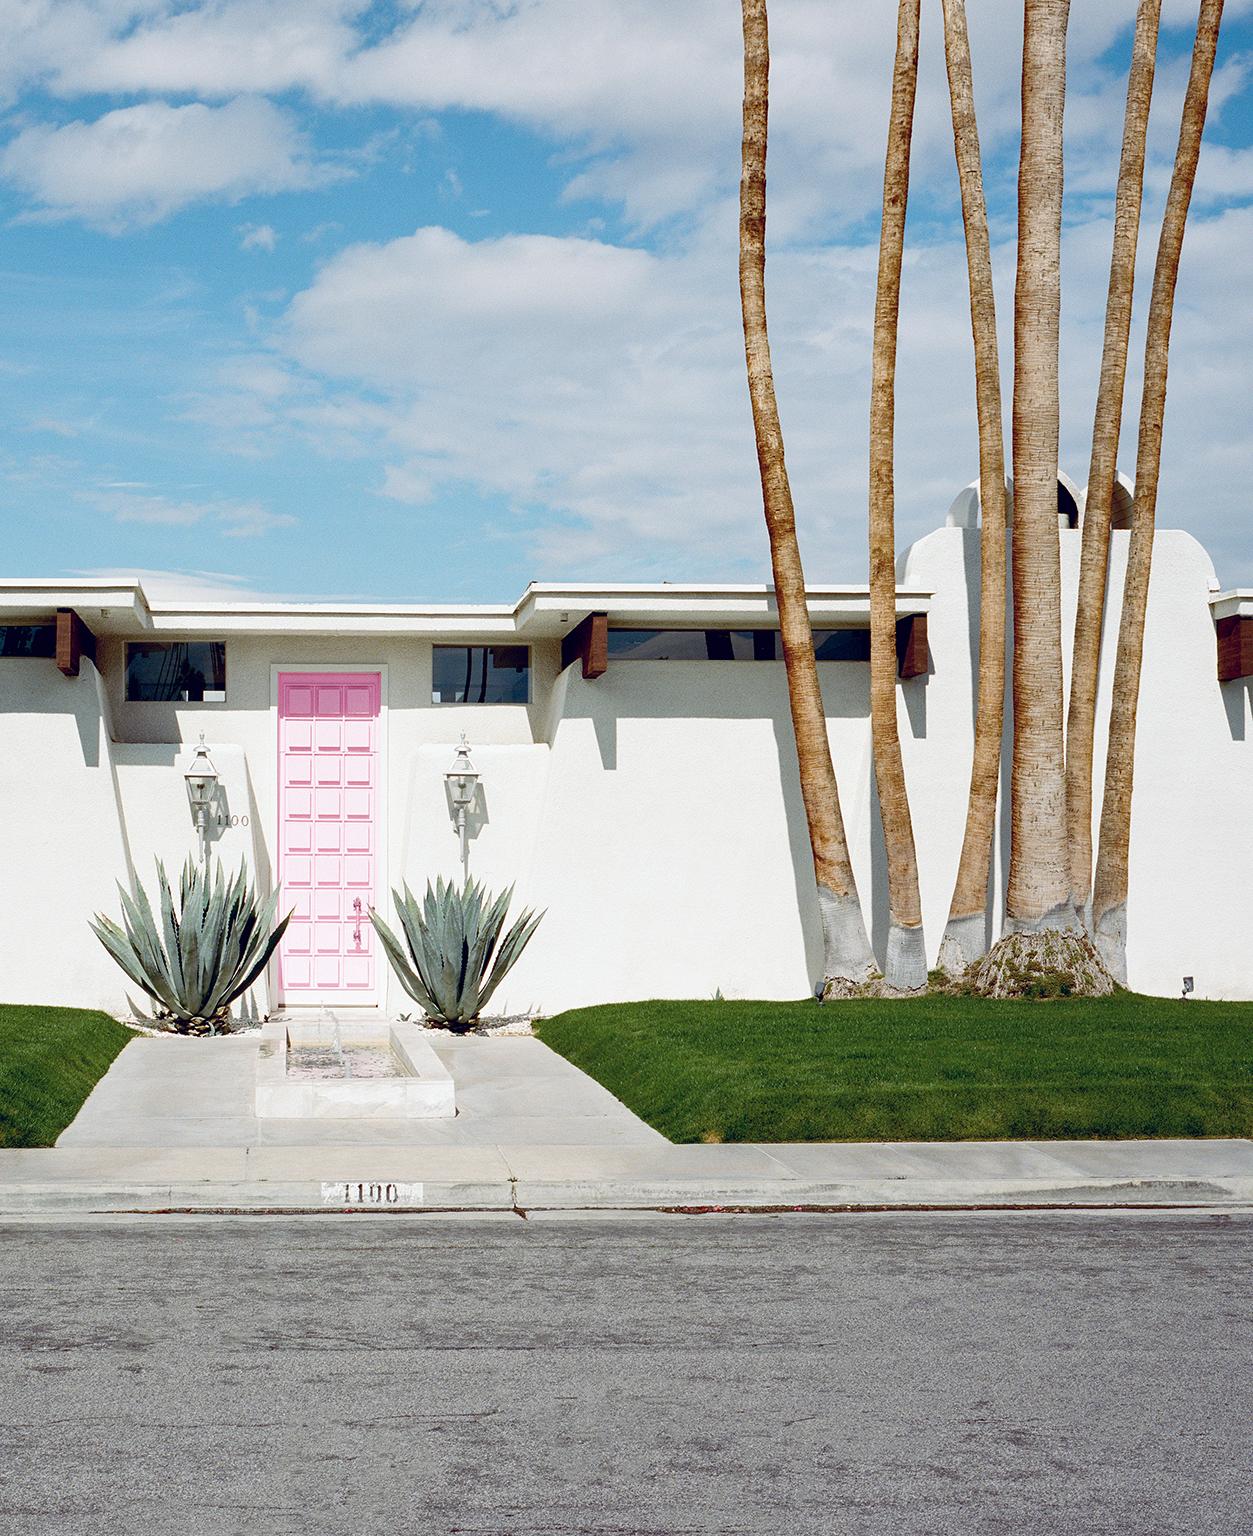 Pink Door, Palm Springs, CA., 2017. Dye Piment Print. 24” x 30”, Edition of 15
_________________________________________________________________________________
Signed, Dated and Numbered on the Reverse.

Jim Ryce has focused on the beauty, irony